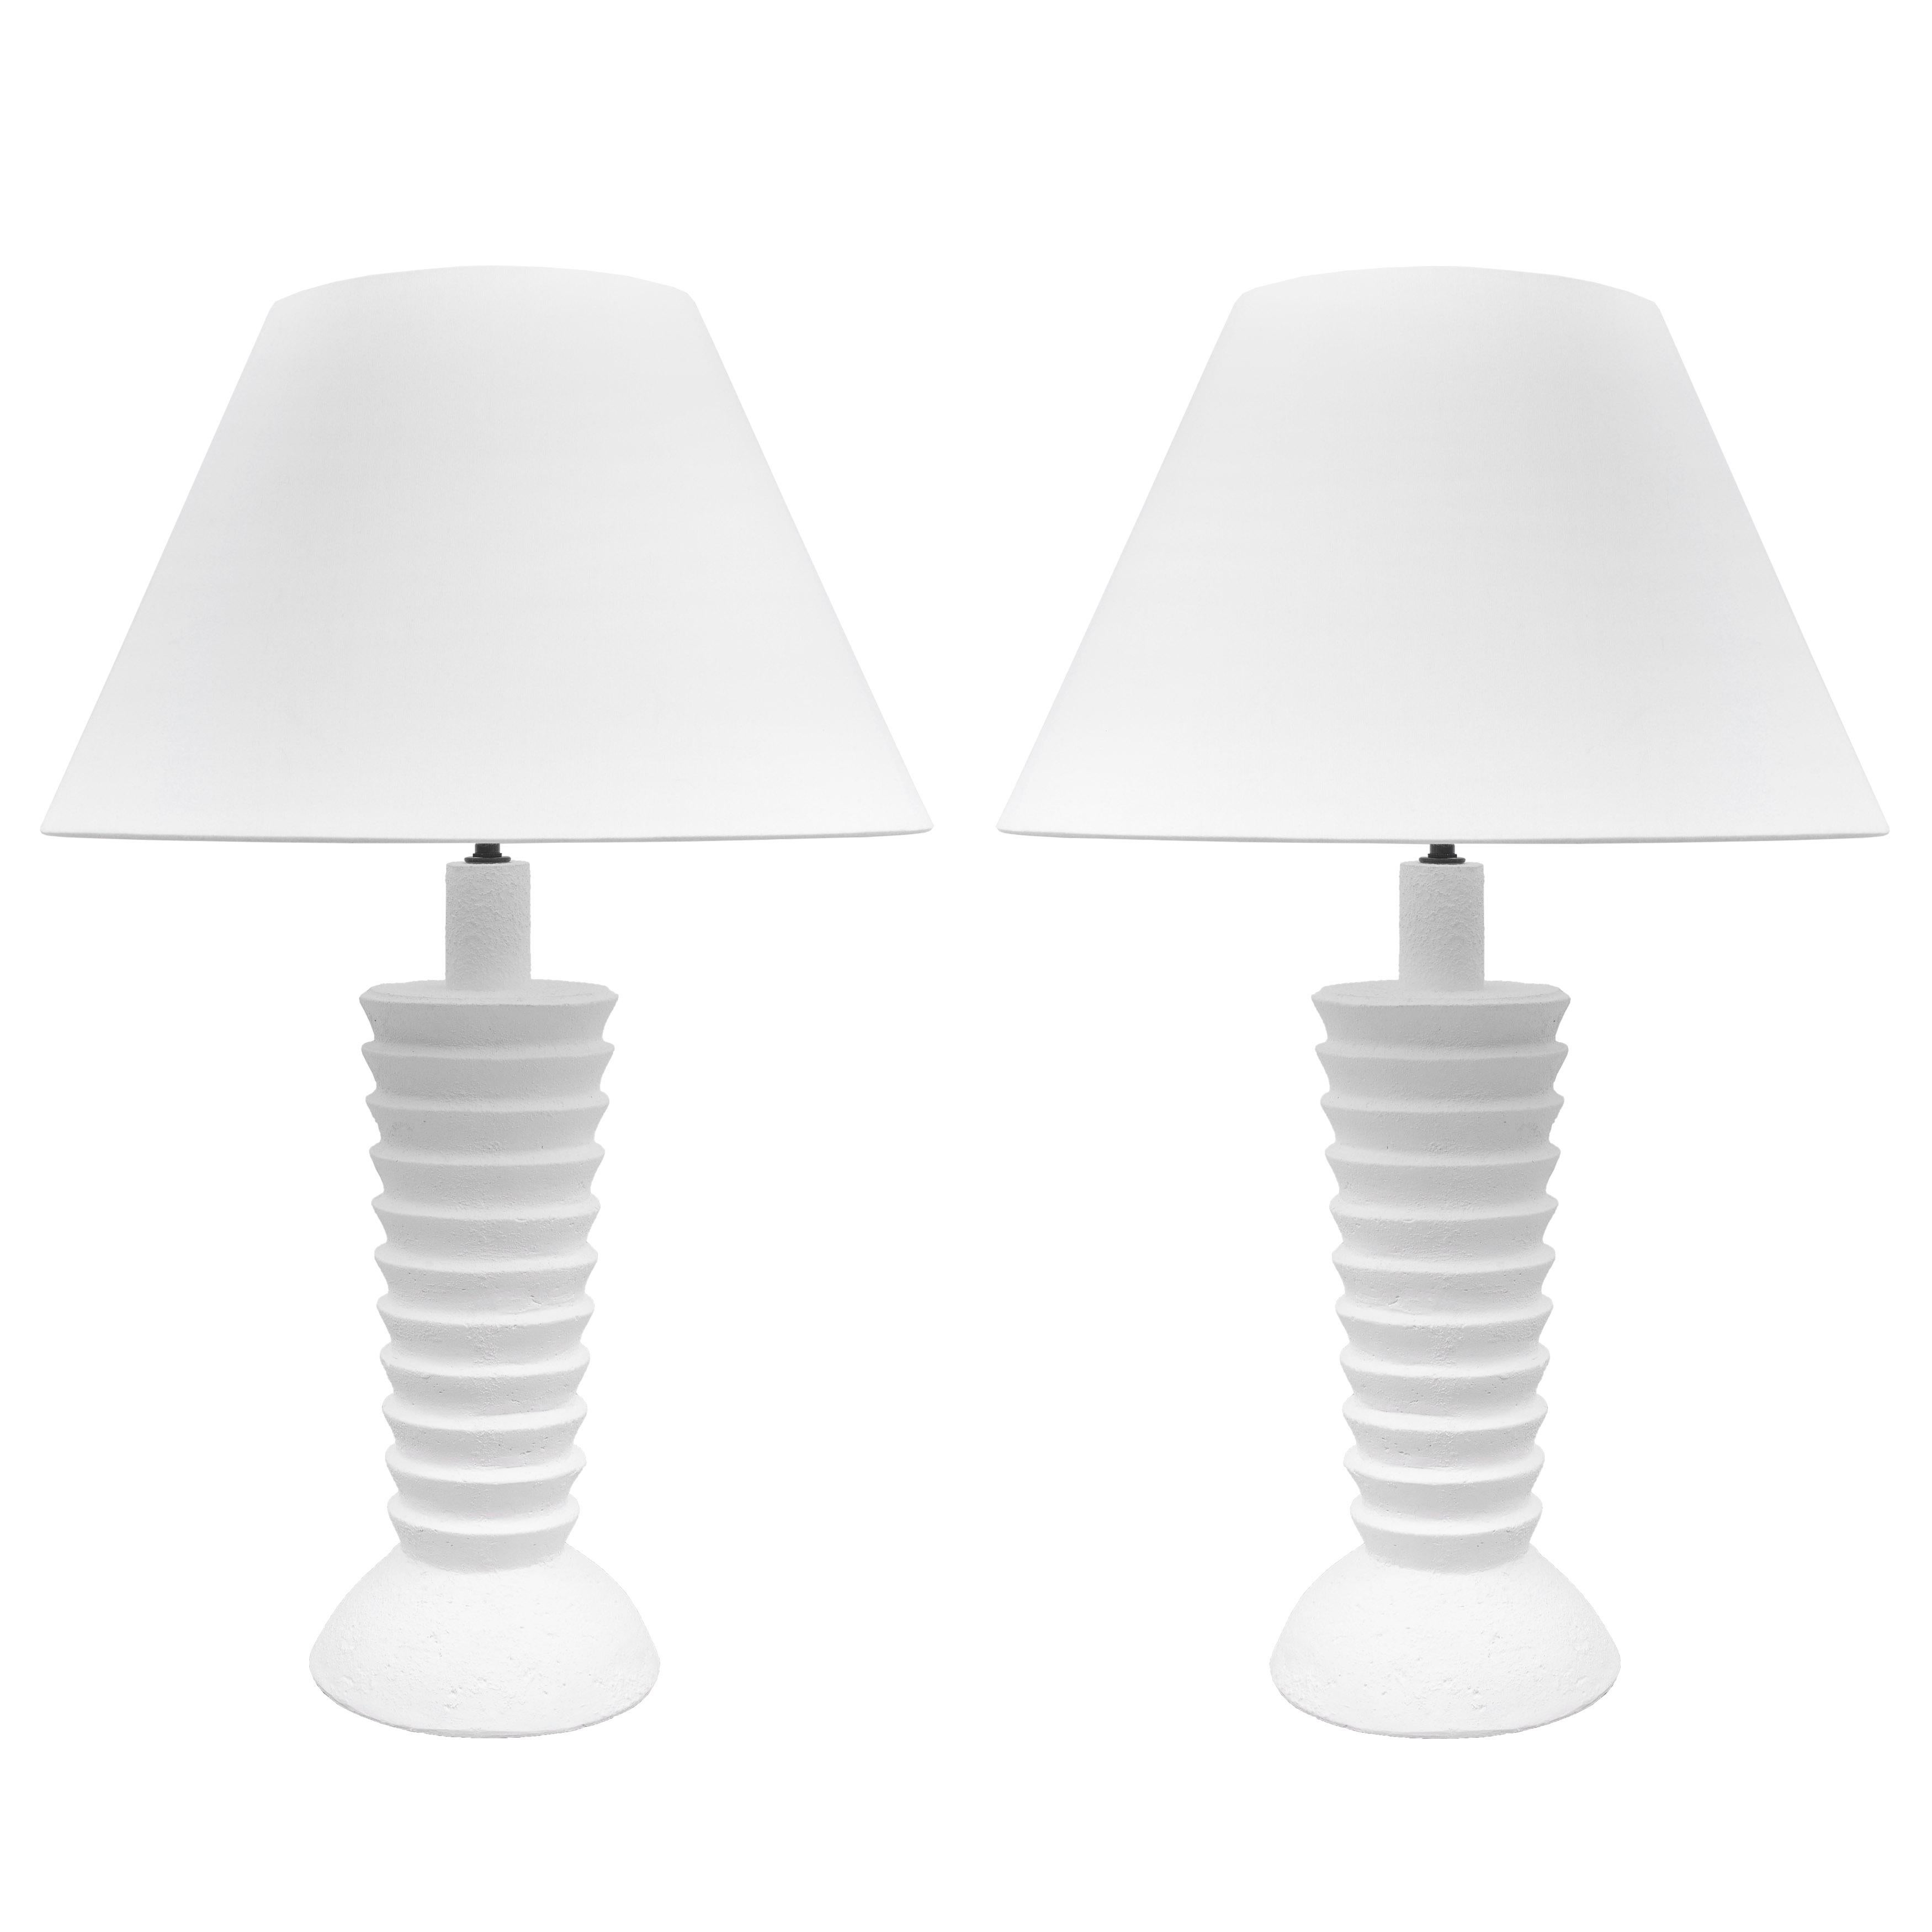 Pair of Custom Plaster Luc Lamps. One pair is currently available.
Lampshades are not included. 
Please note that these lamps are customizable in size, color, material.
Lead time is 8-10 weeks.
Measures: Height (to tip of finial) is 33.25